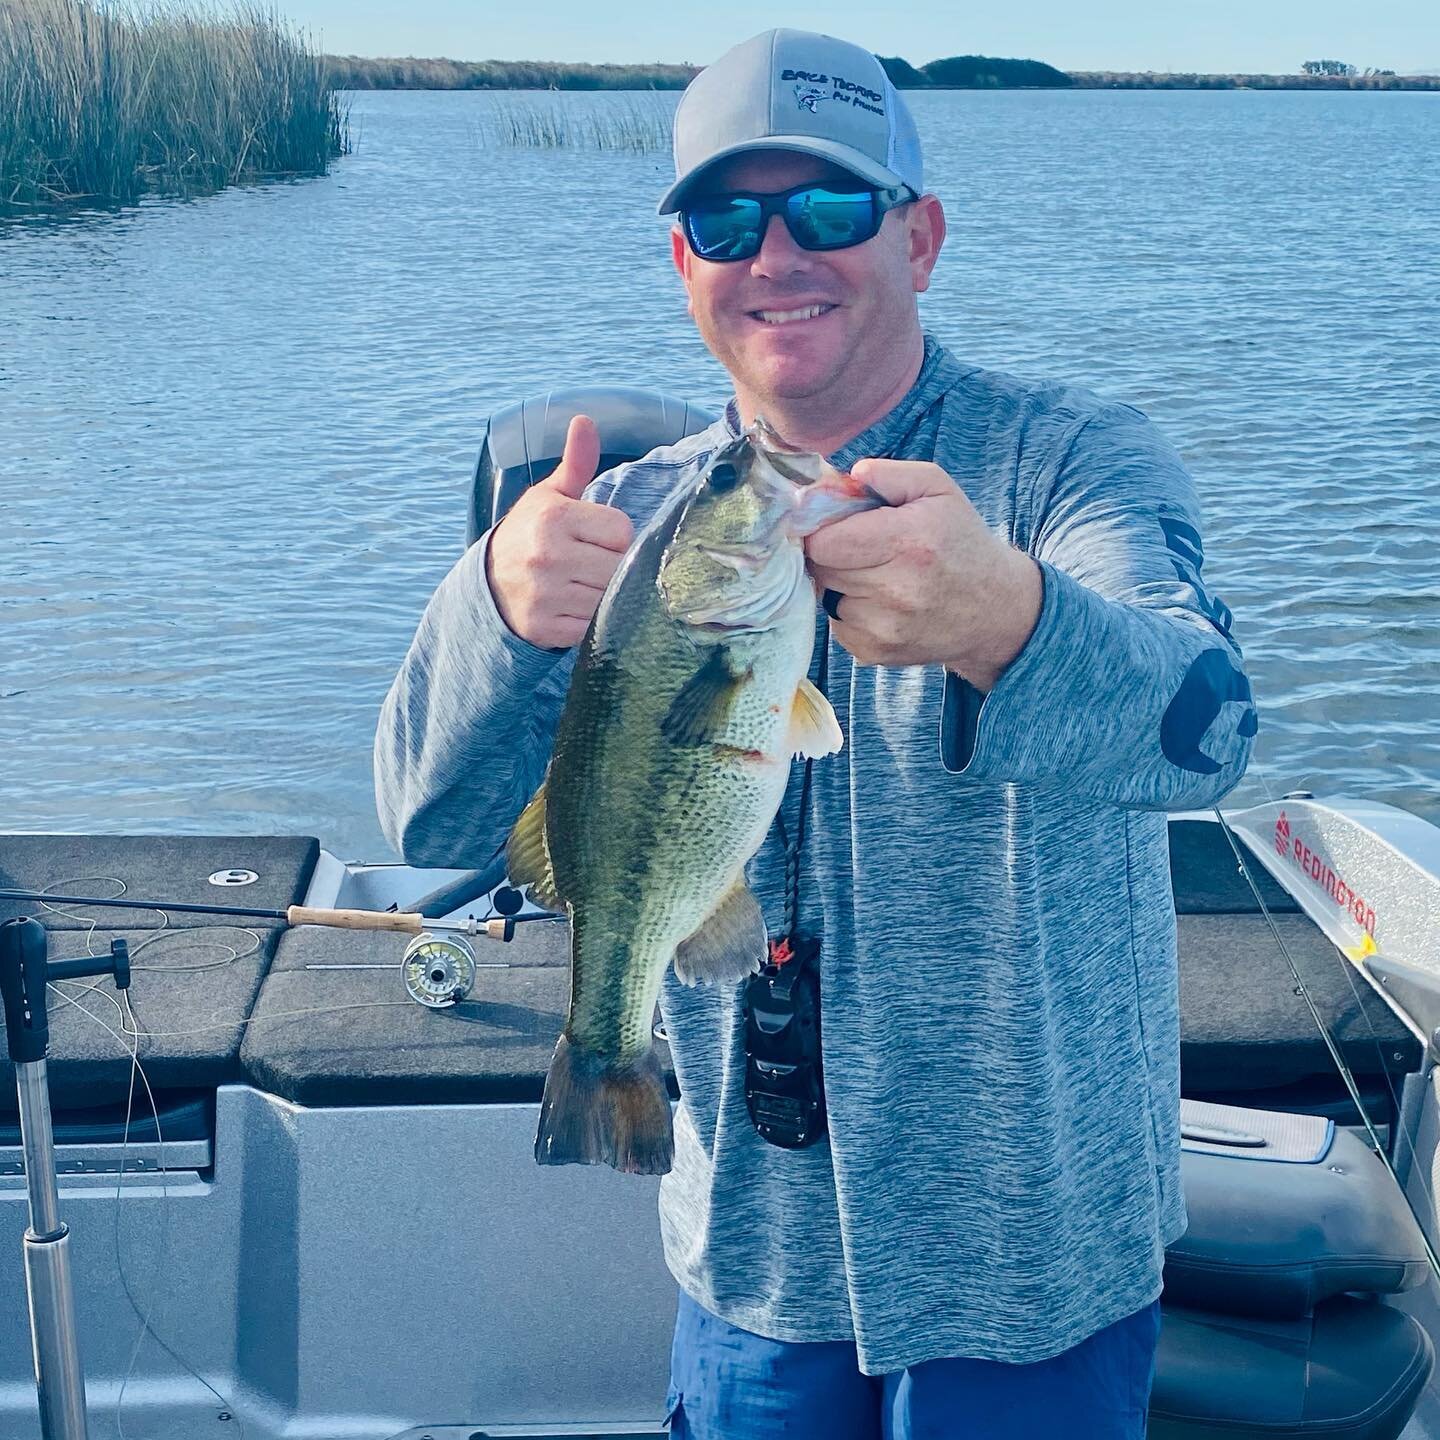 Dad &amp; I warming up those Topwater bass for @costabassnfly !!! @costasunglasses @simmsfishing @calbassunion @redingtongear @rioproducts @galvanflyreels @grundens @brycetedfordflyfishing